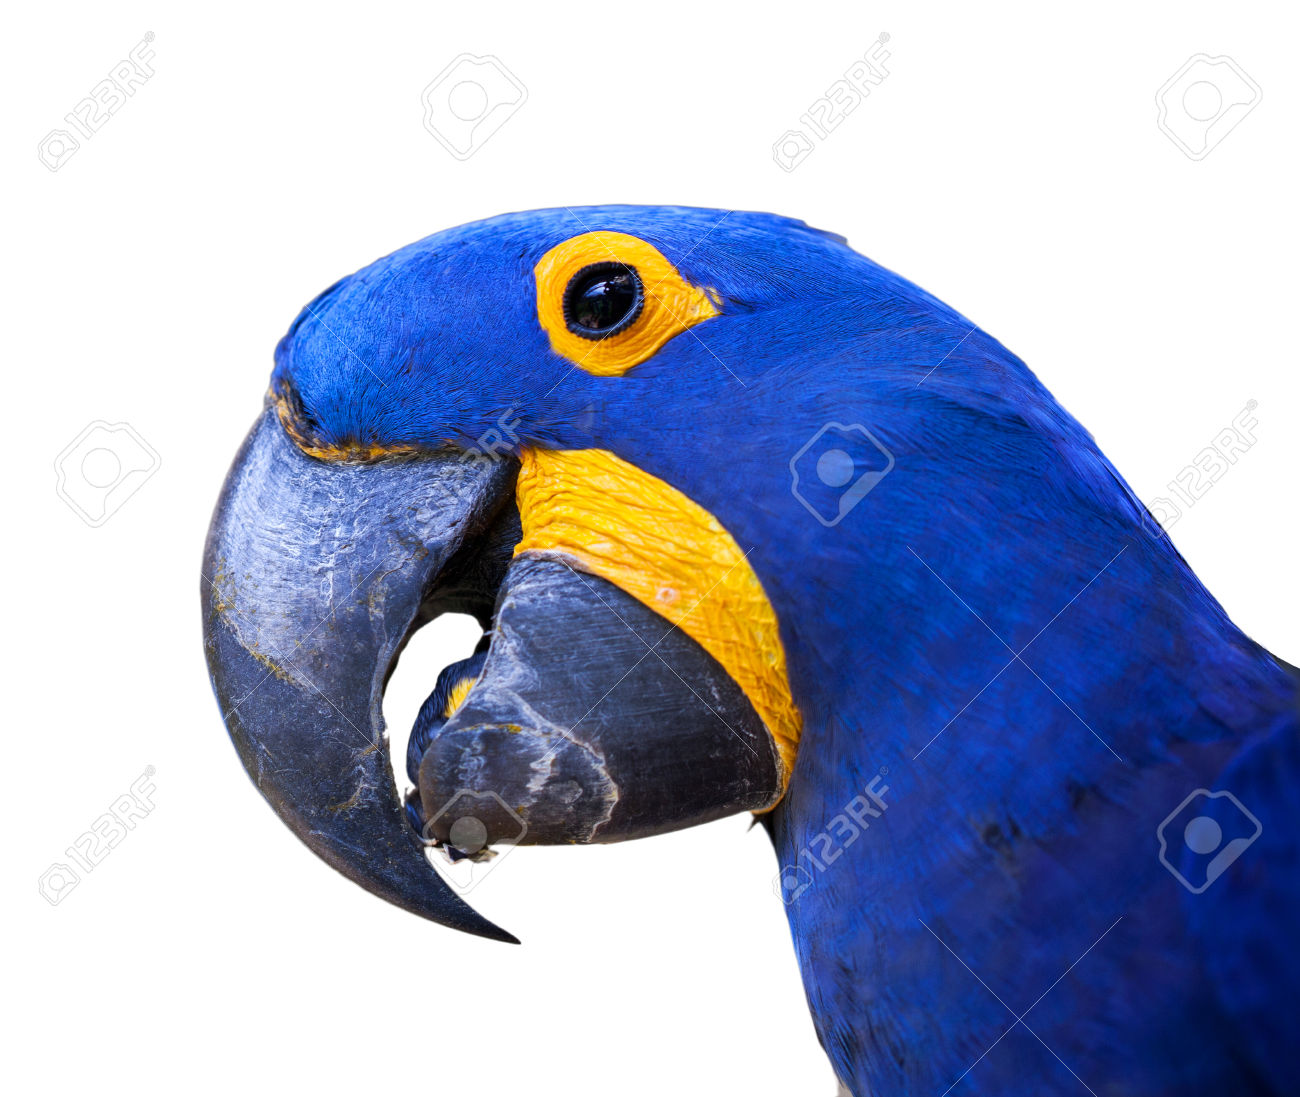 Hyacinth Macaw clipart #12, Download drawings